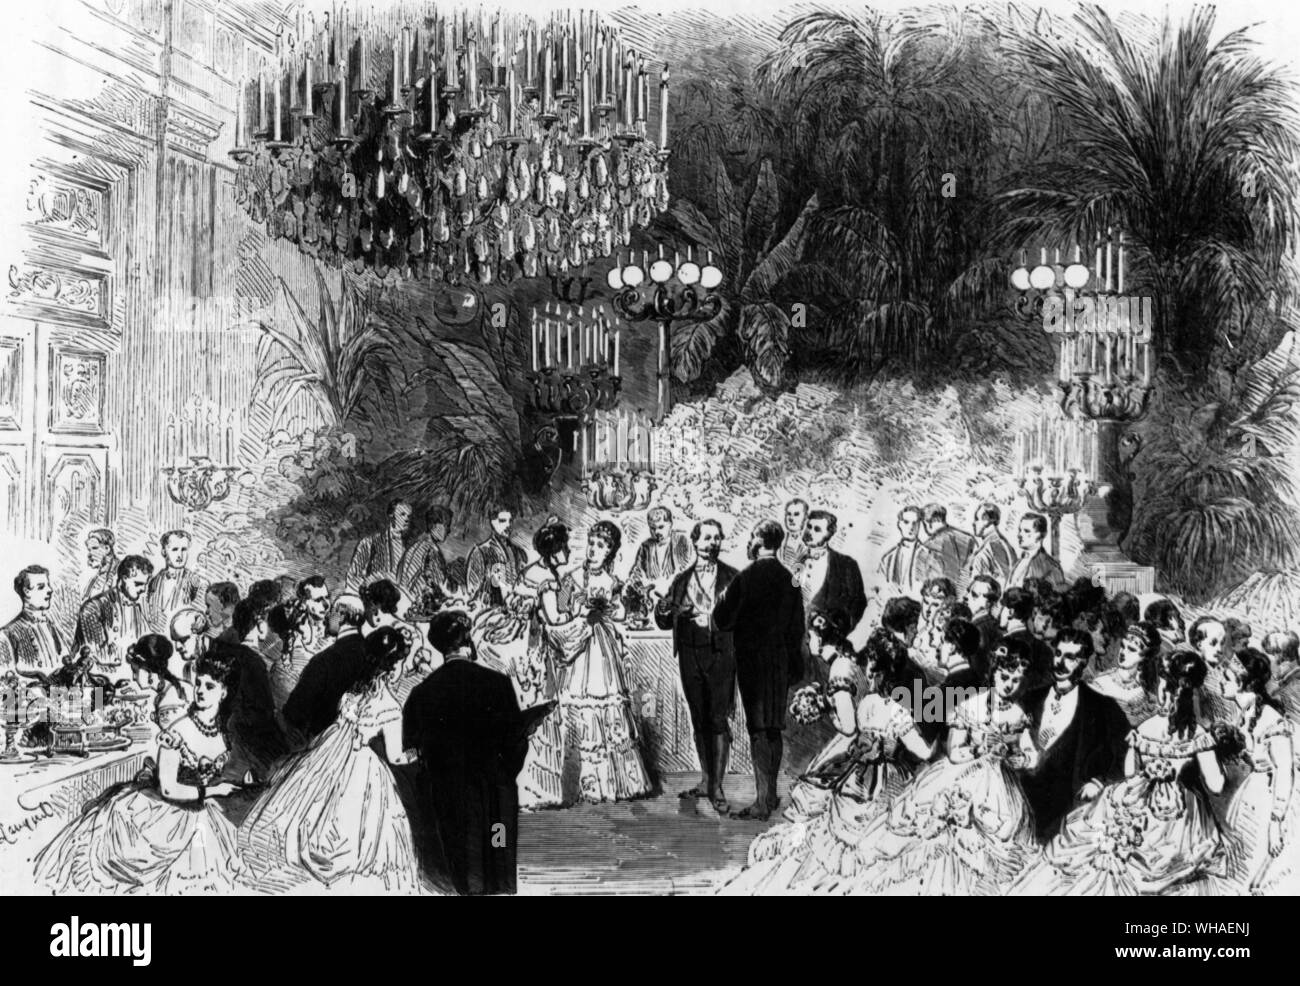 Les 'Lundis' (small parties for 300 guests) were held by the Empress Eugenie at the Tuileries. This one was held on 10th May in honour of the Prince of Wales and the Archduke of Austria. Napoleon III is standing in the centre (with the moustache), Eugenie is standing on his left. Stock Photo